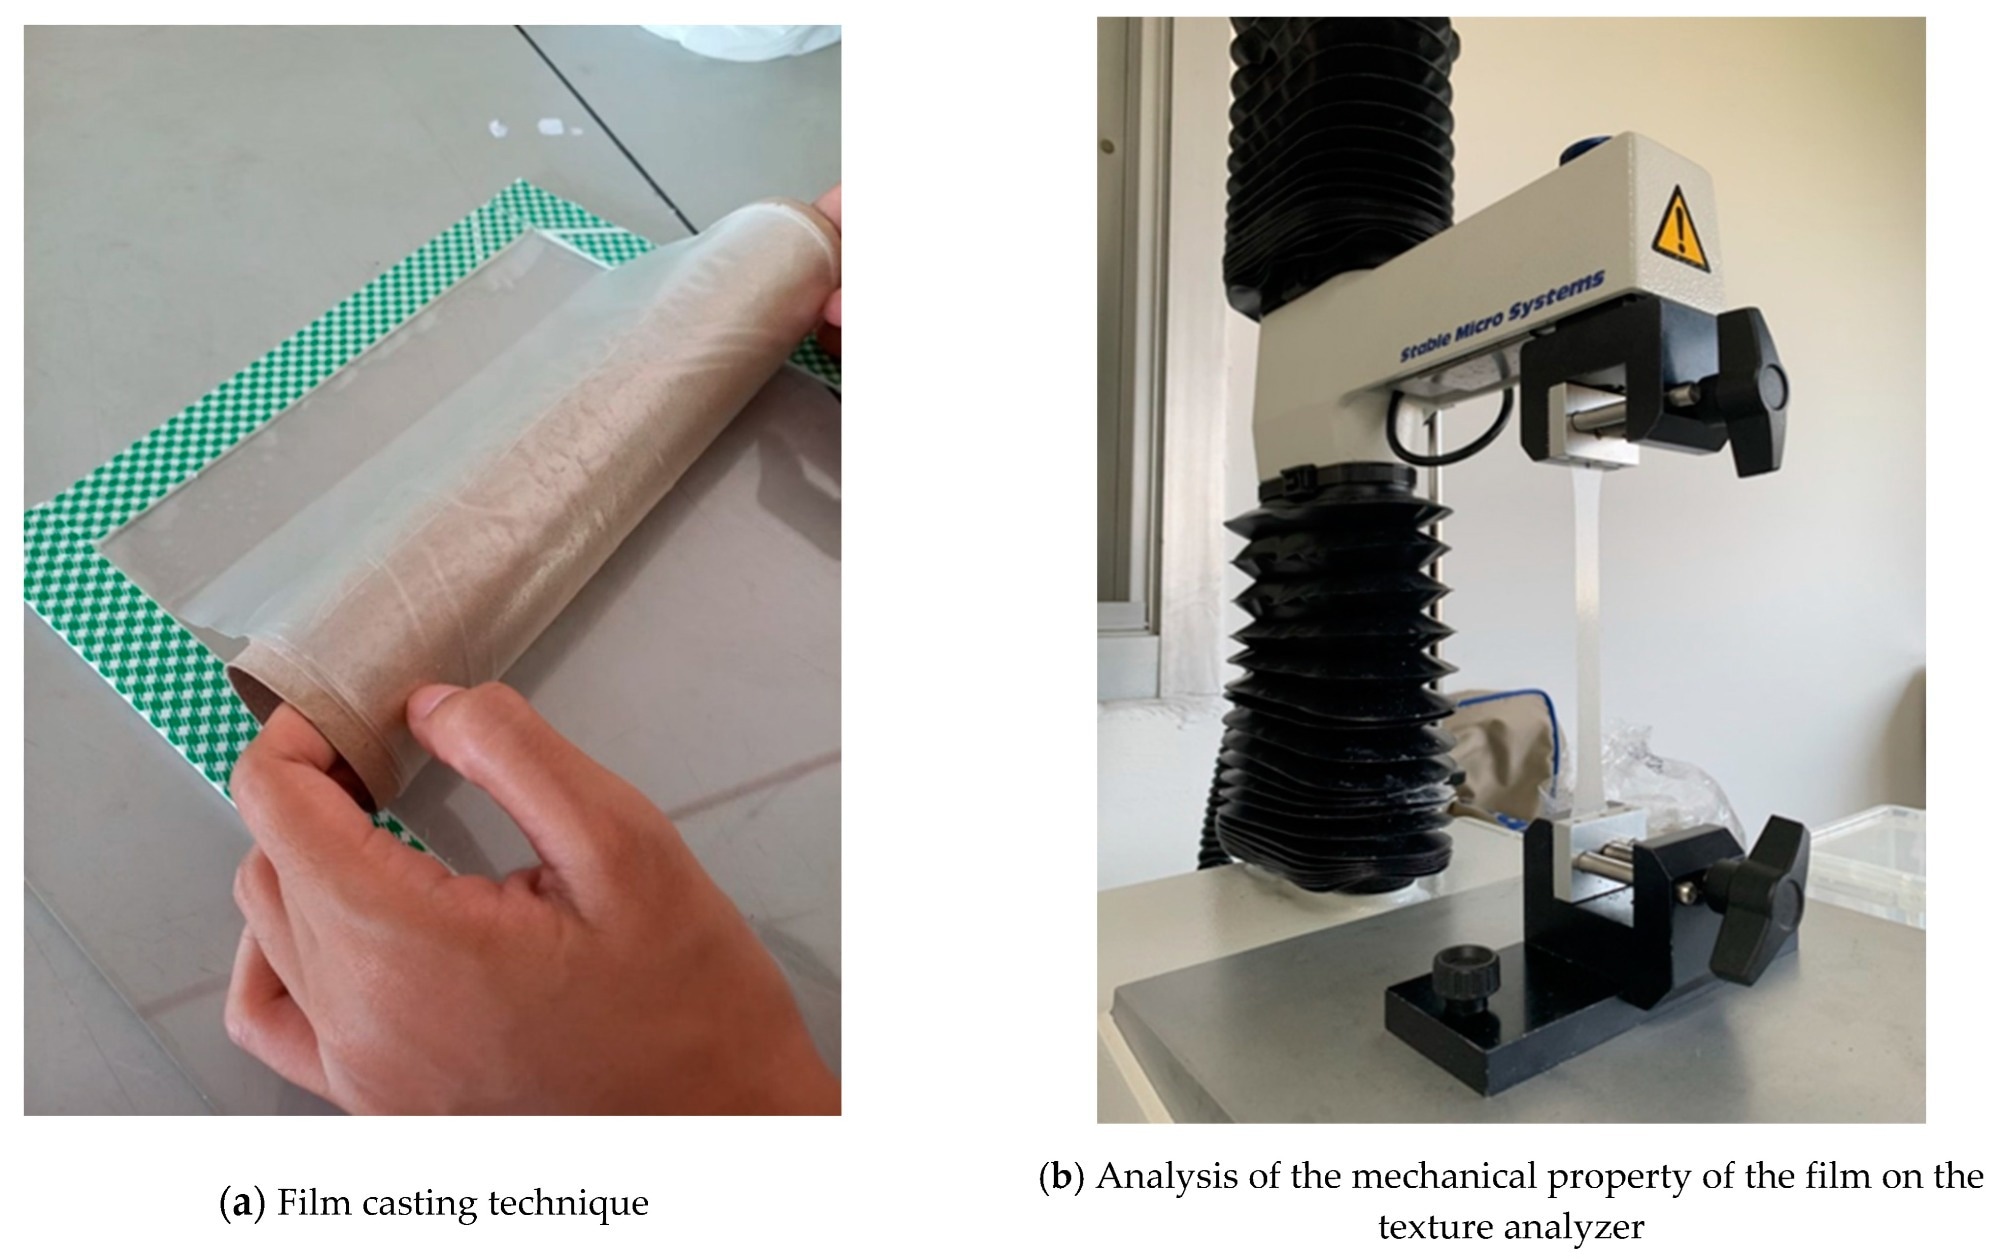 Casting the PVA/ST/WMRE film (a) and analysis of the mechanical property of the film on the texture analyzer (b).